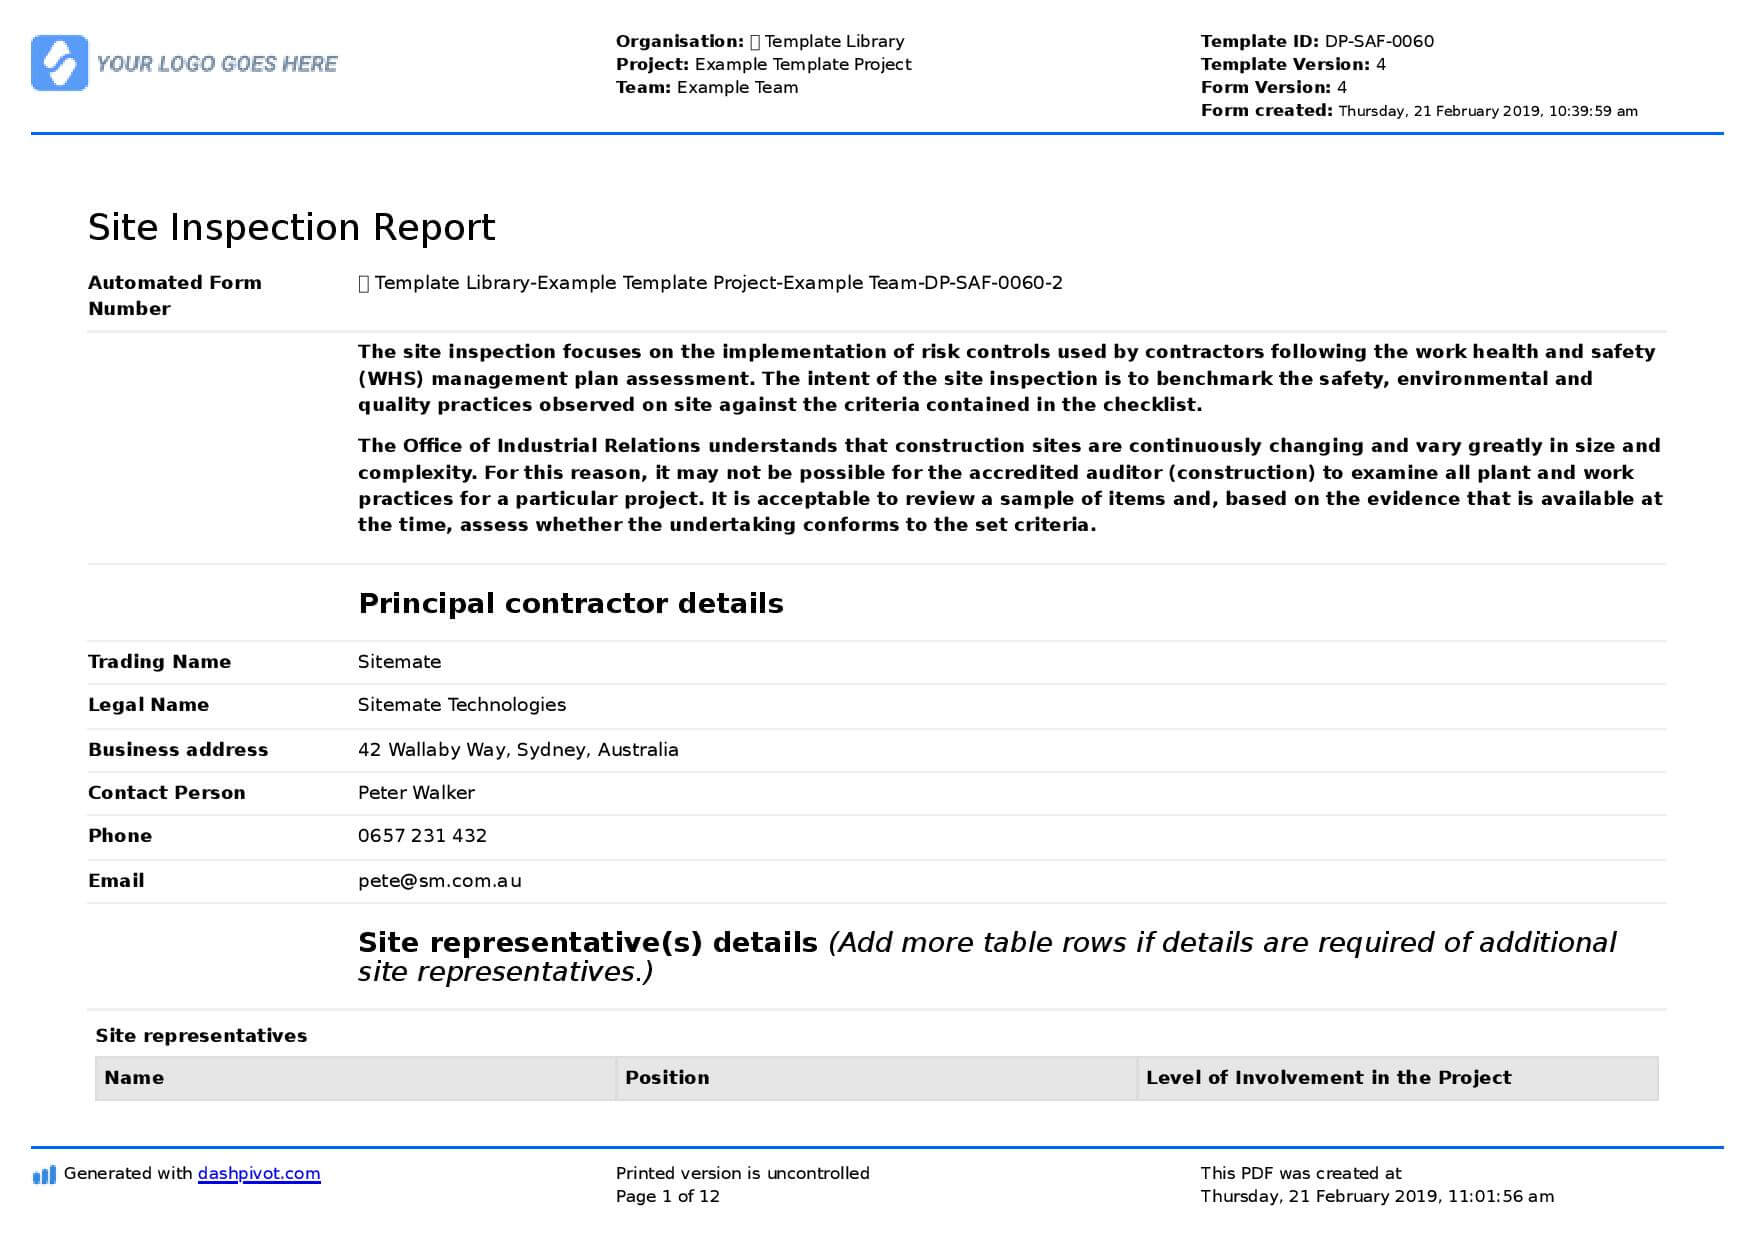 Site Inspection Report: Free Template, Sample And A Proven Regarding Part Inspection Report Template